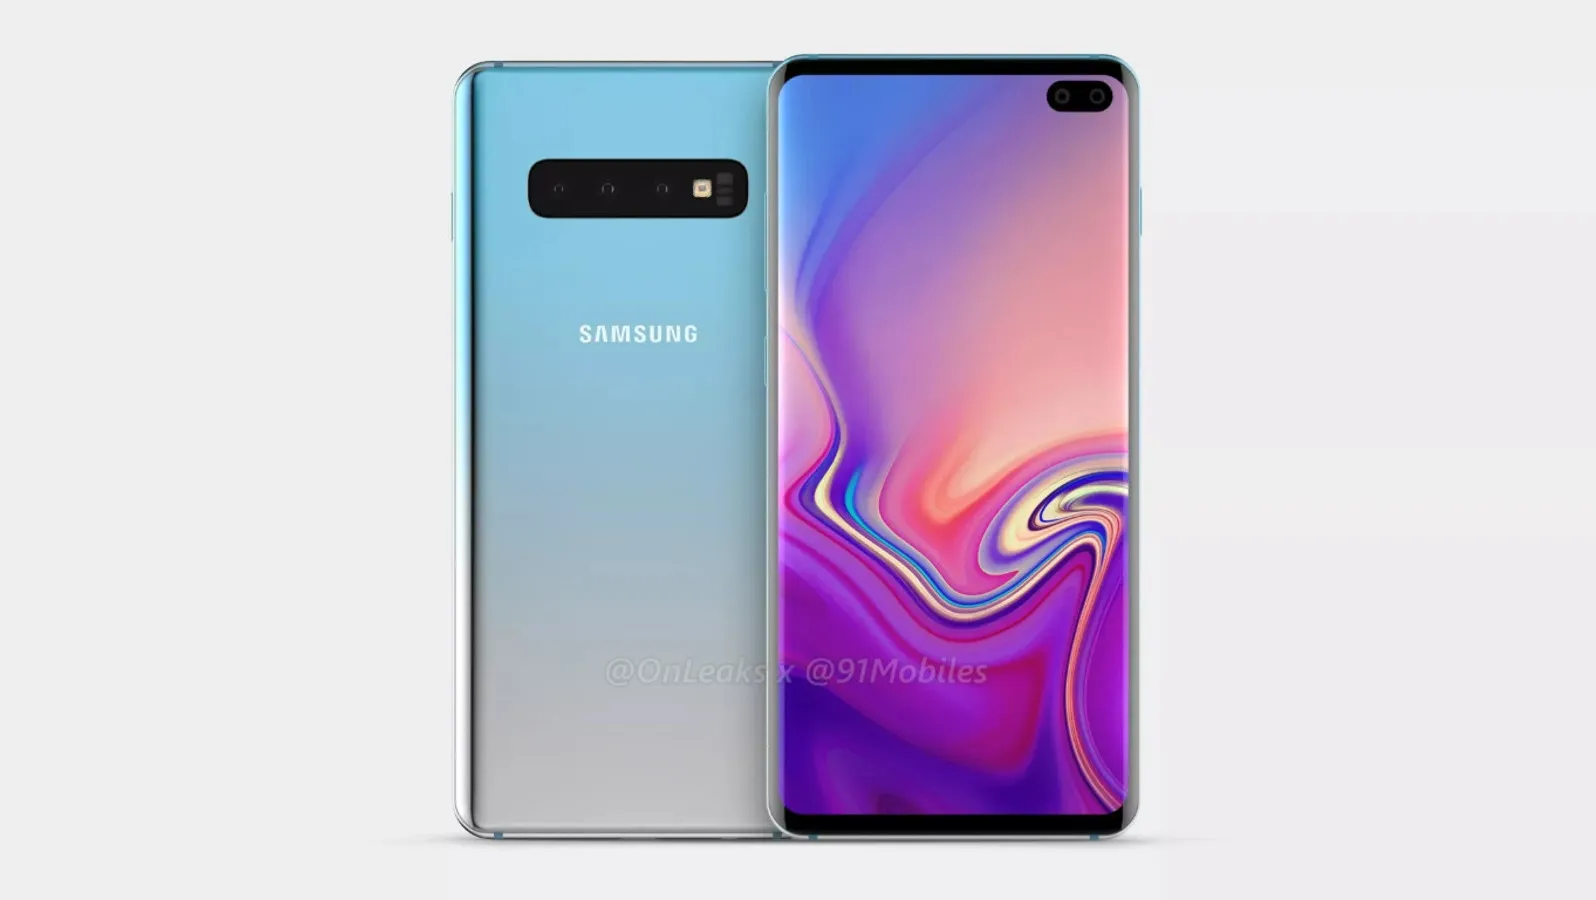 Fix Samsung Galaxy S10 that gets stuck on the logo during boot up